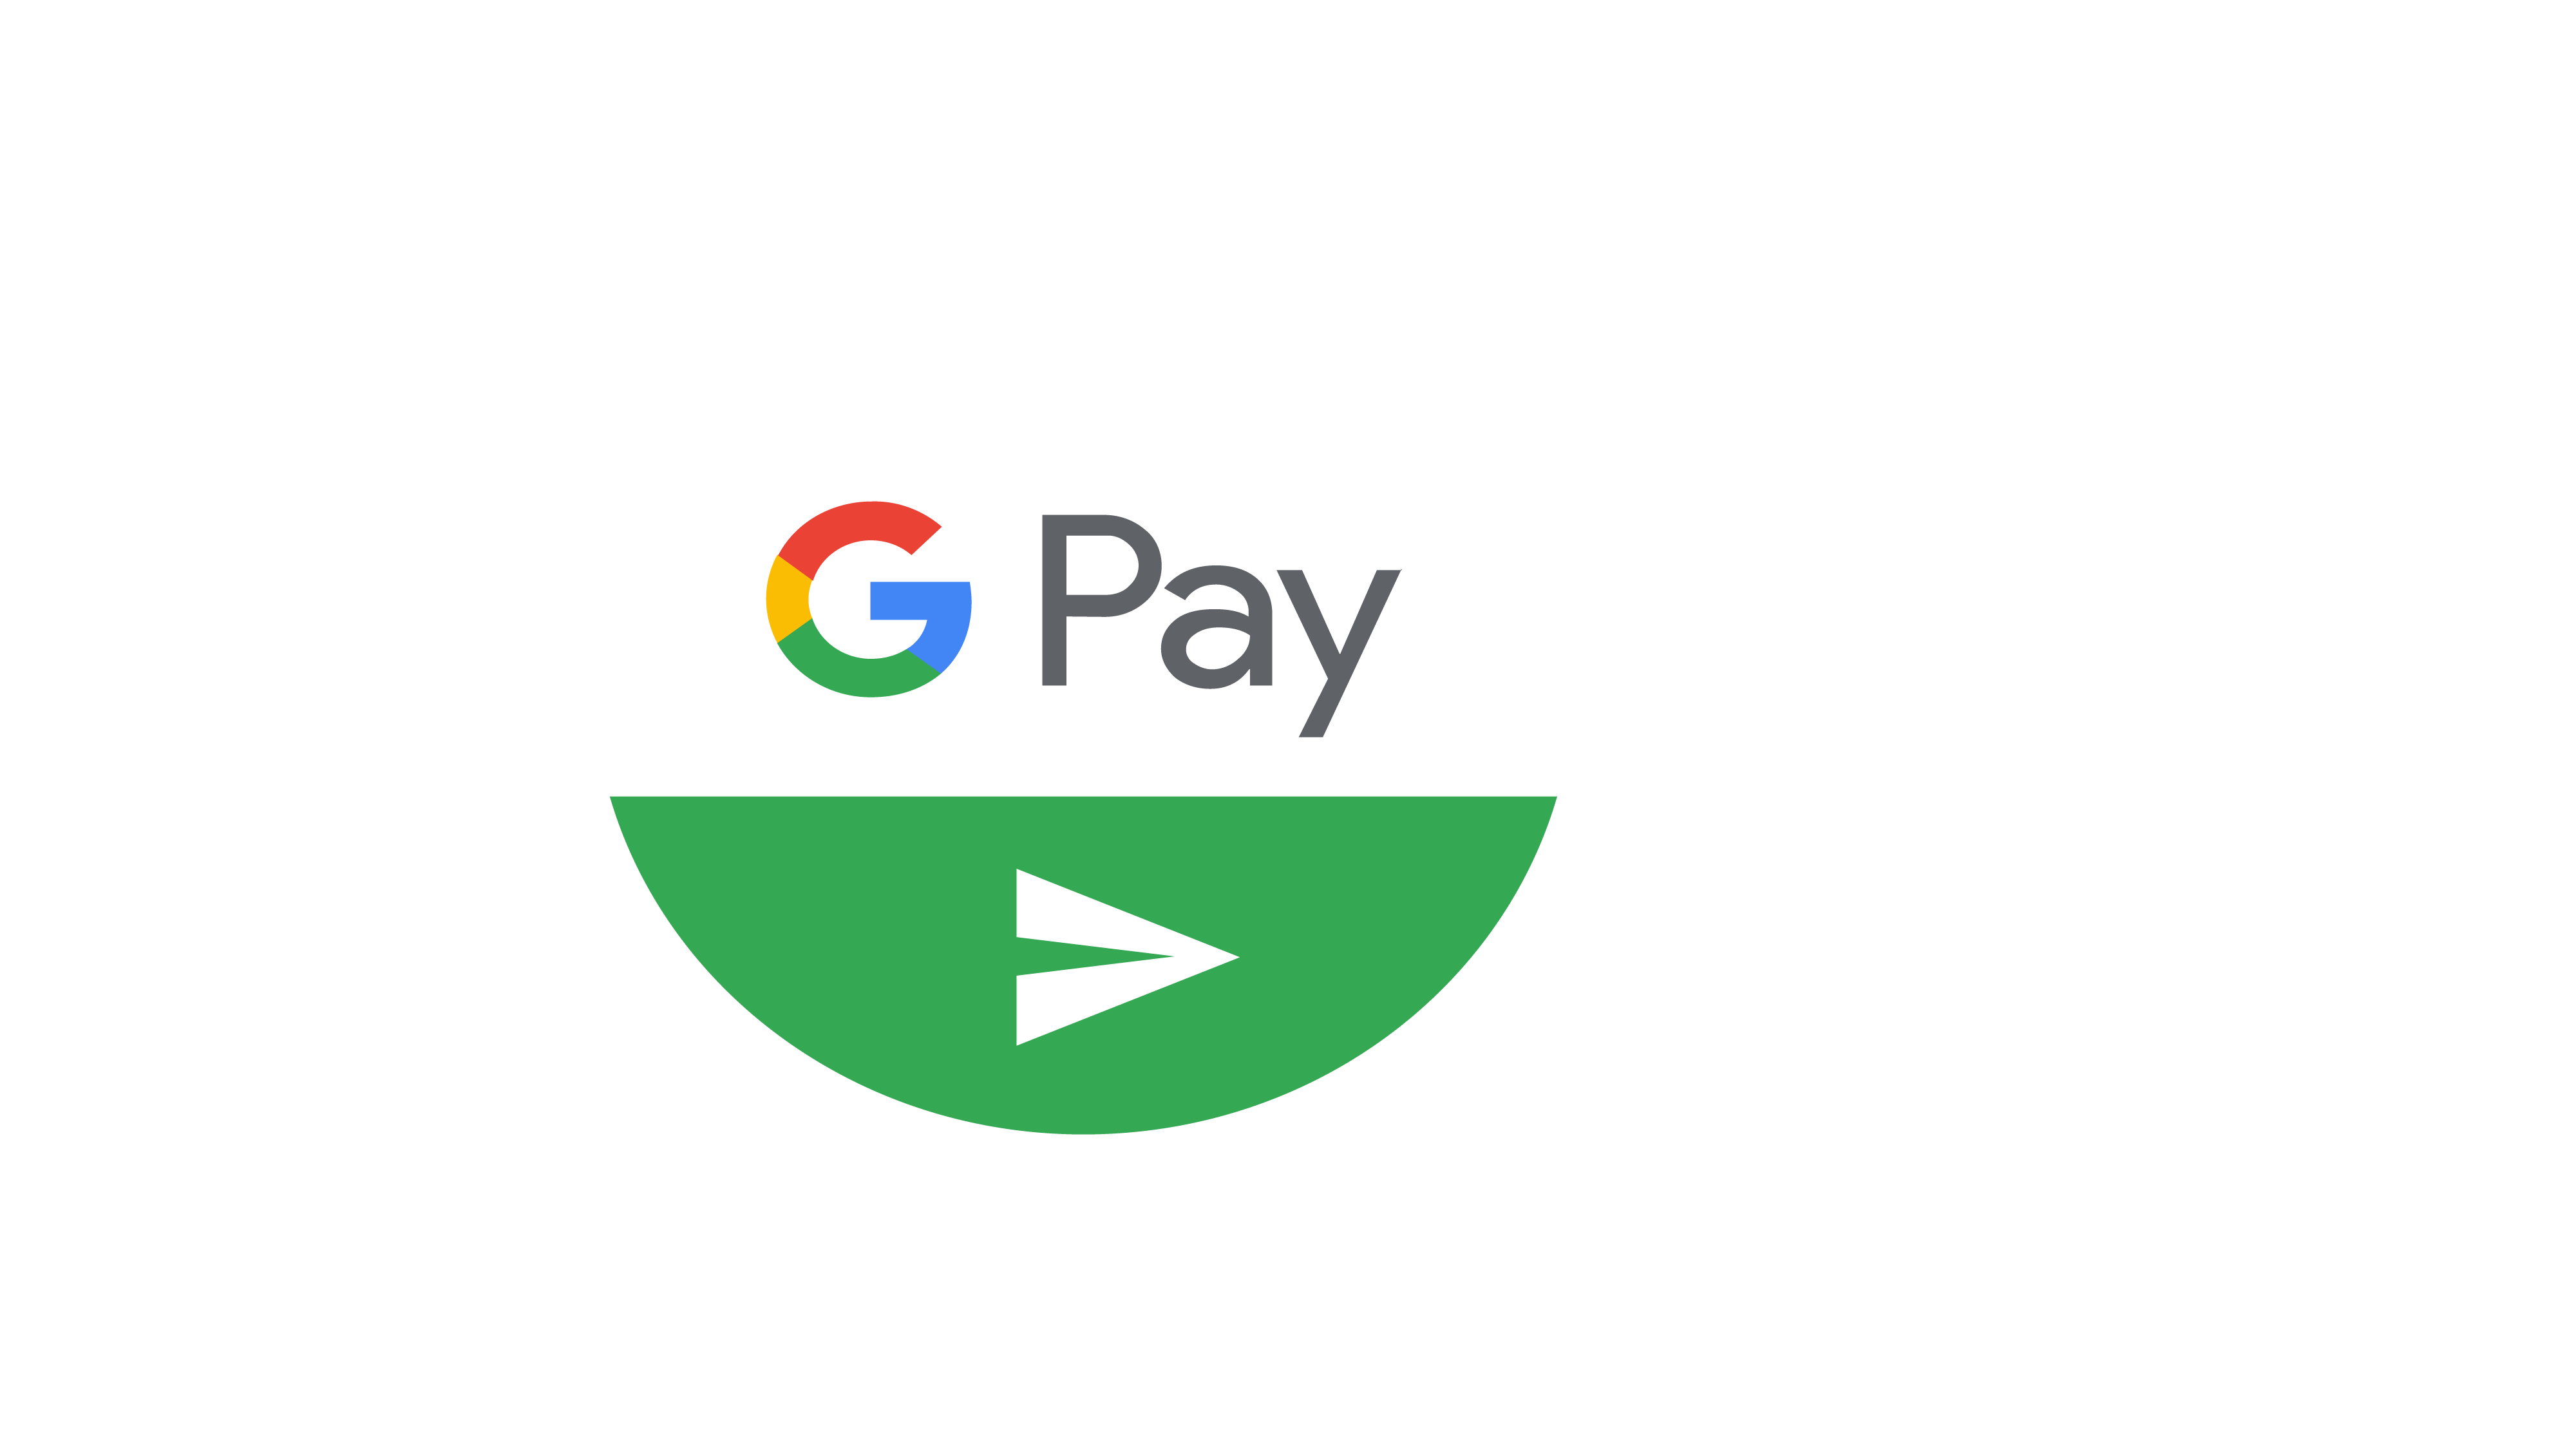 Pay